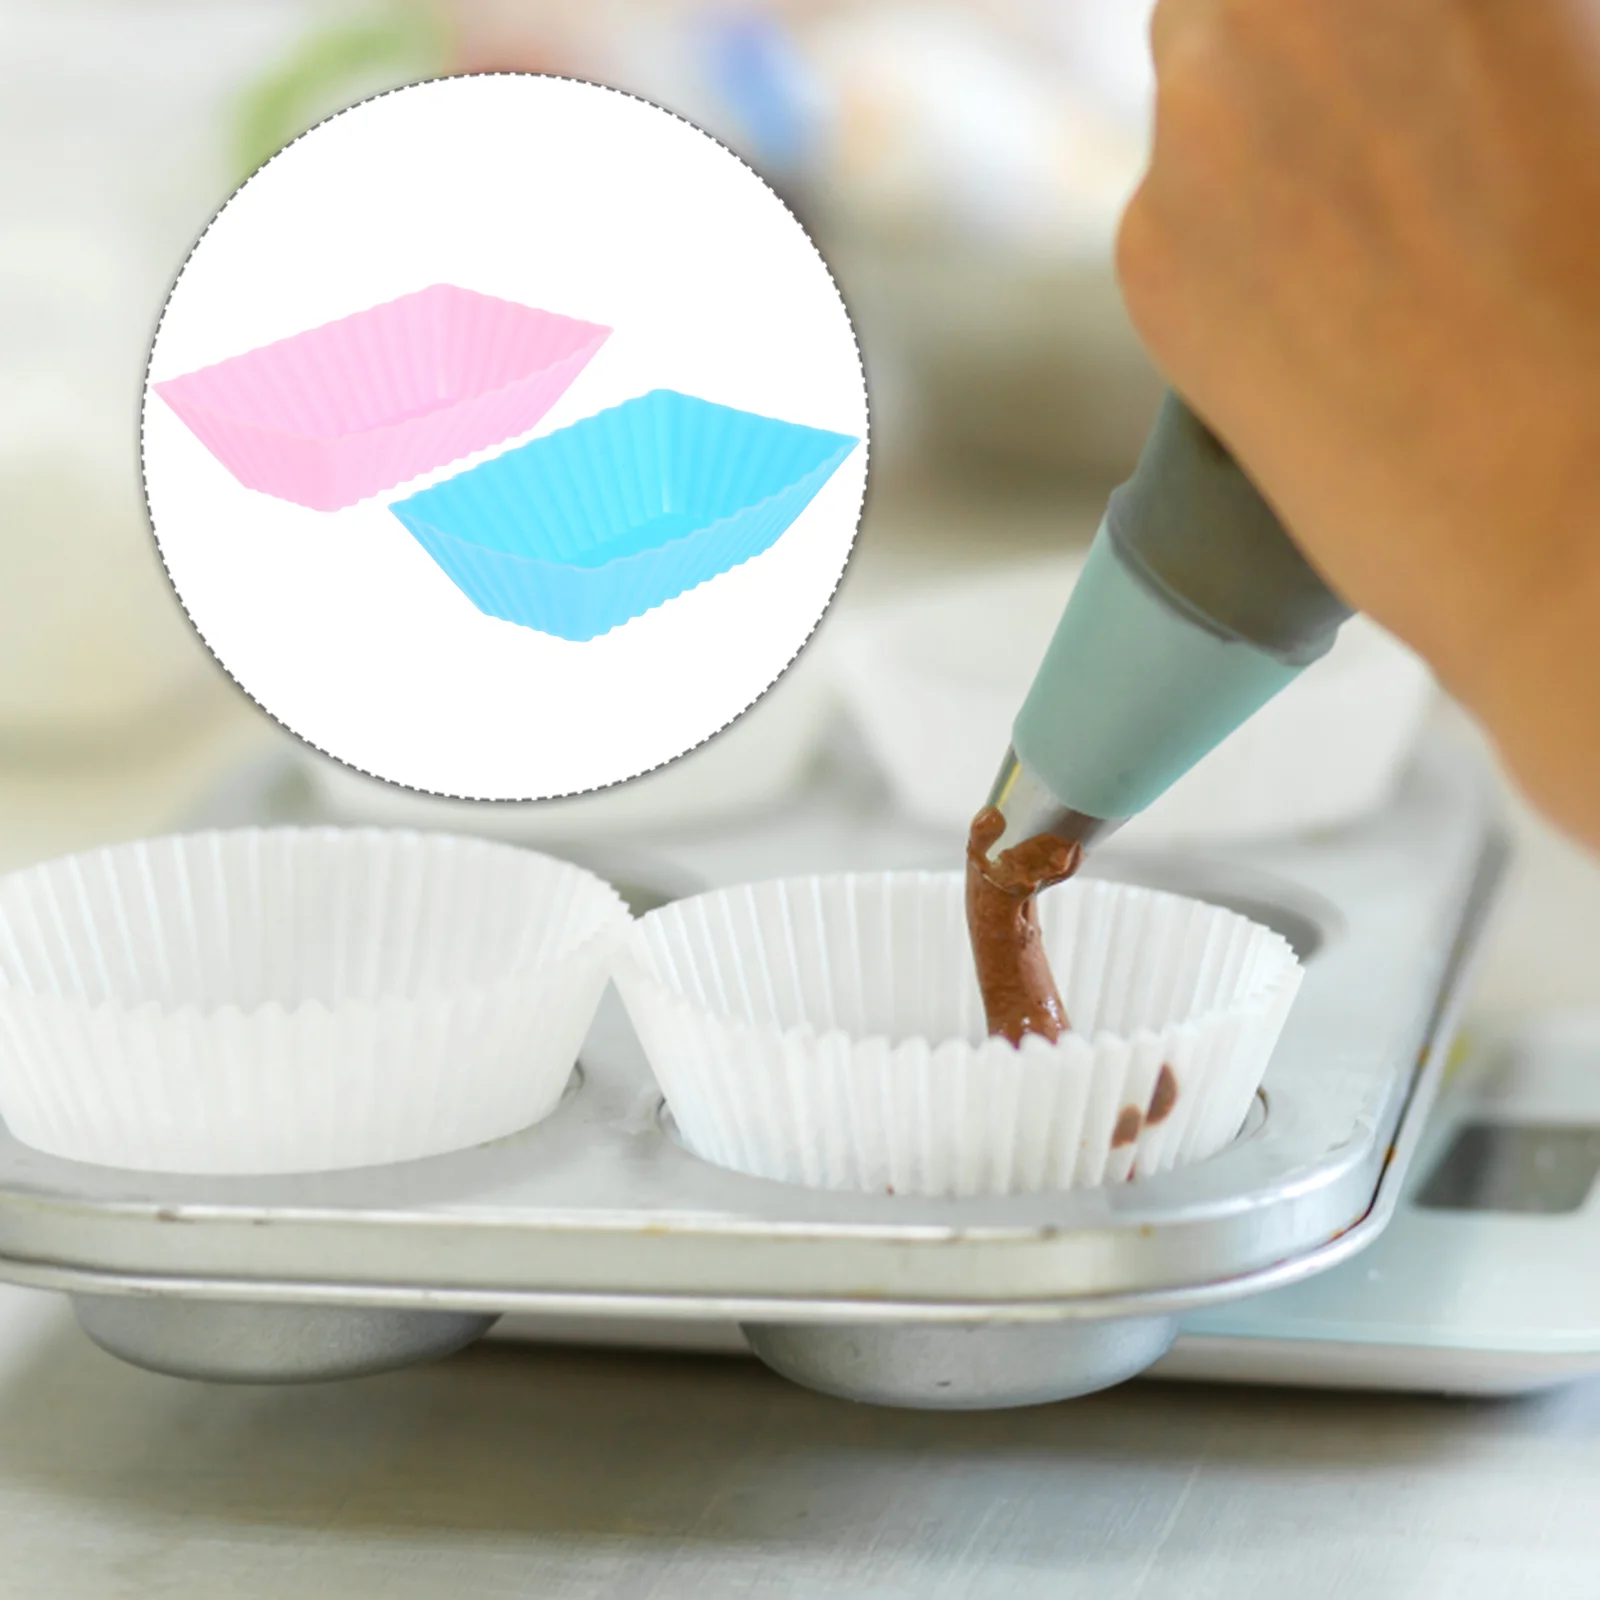 

Cups Silicone Muffin Cupcake Baking Molds Cake Liners Cup Reusable Mold Pan Stick Non Wrapper Liner Pastry Dessert Mini